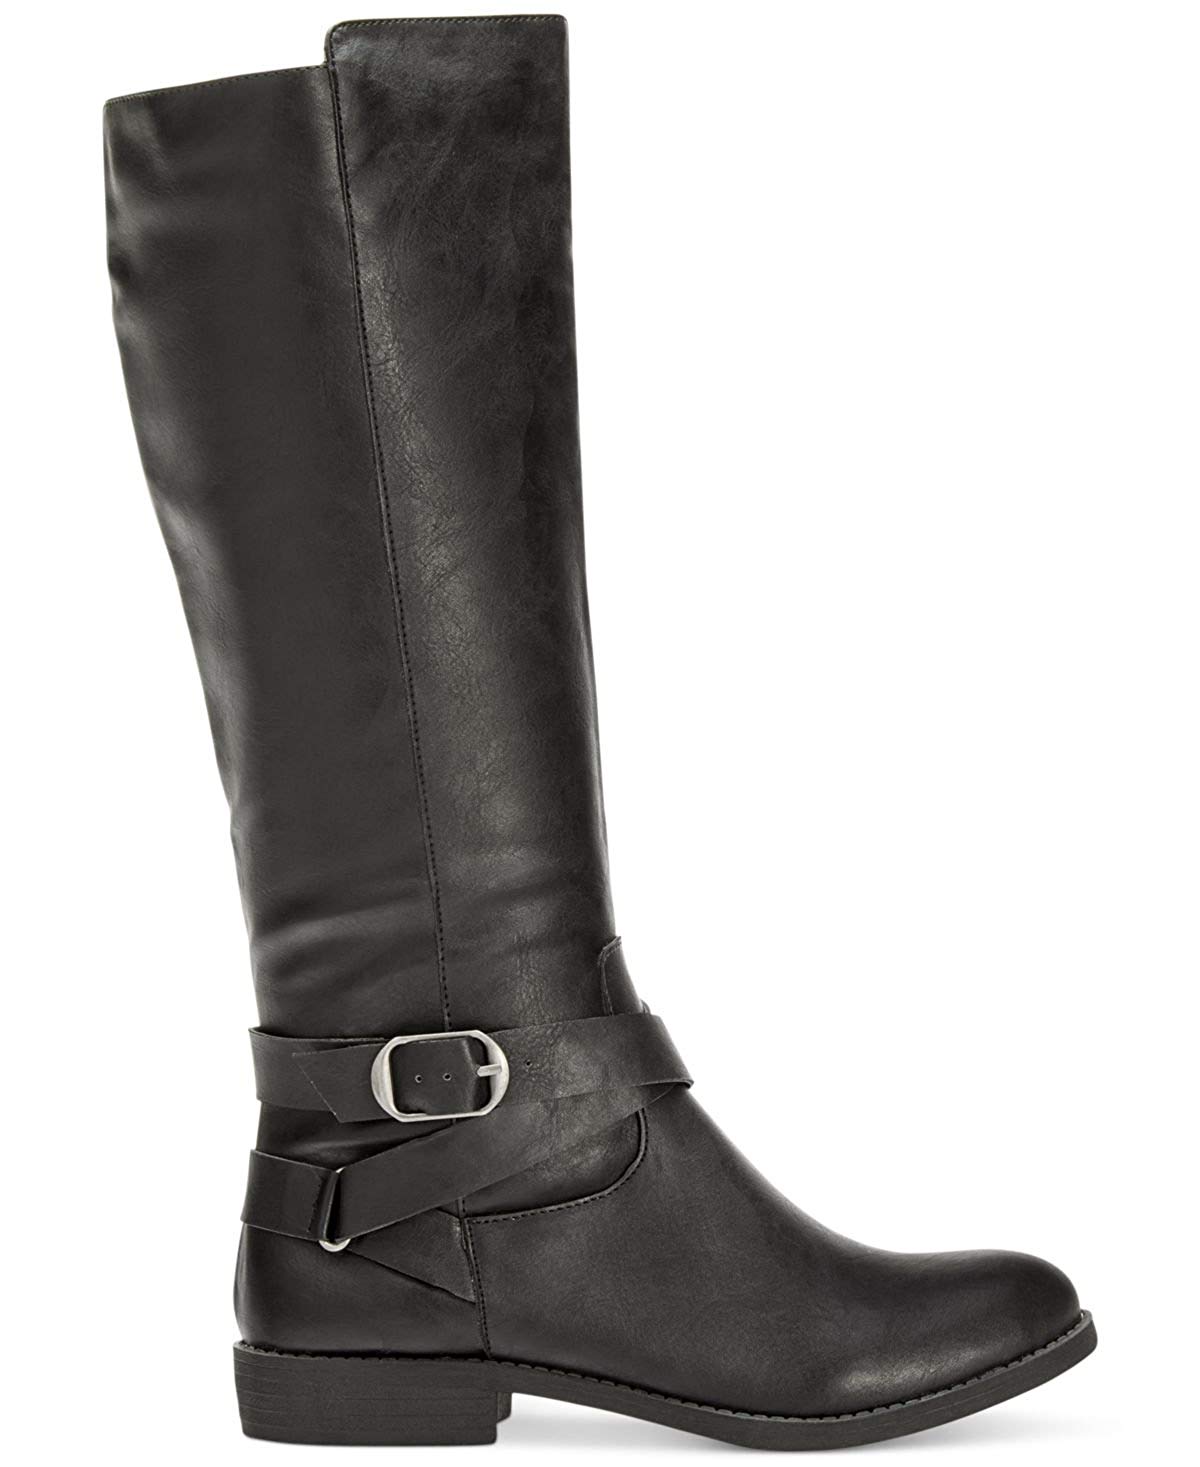 Style & Co. Womens Madixe Almond Toe Knee High Fashion Boots, Black ...